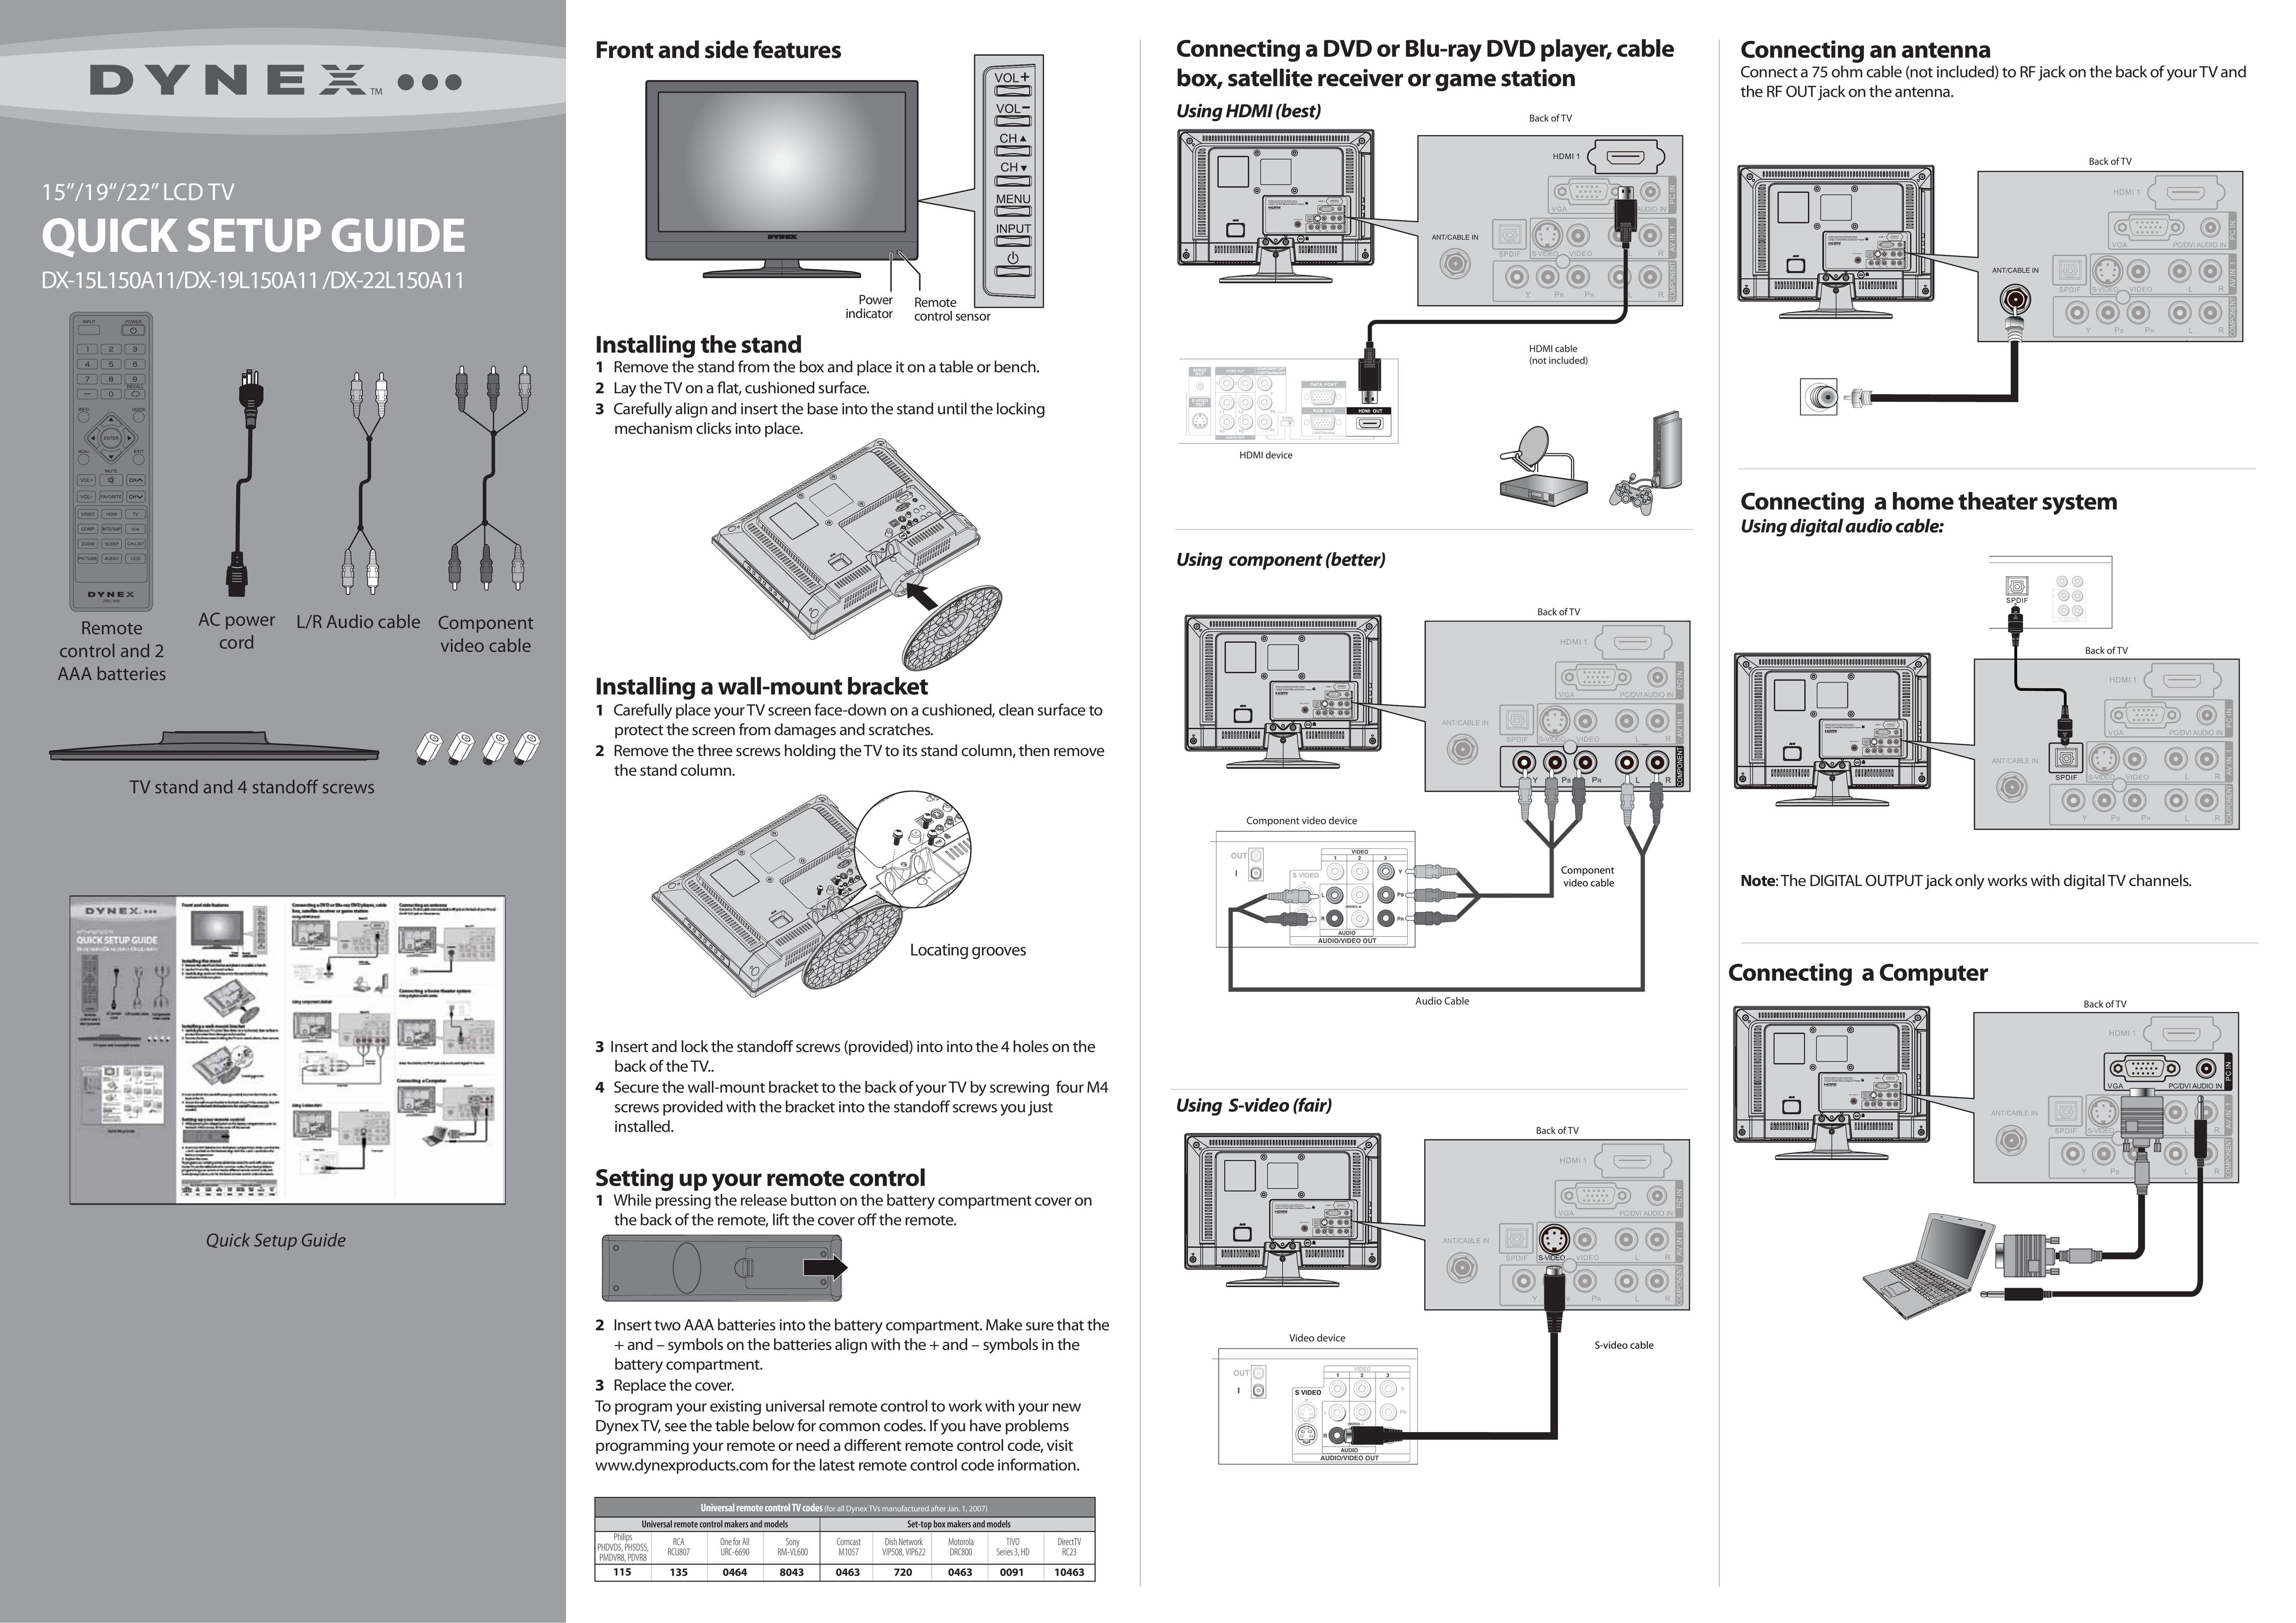 Dynex DX-19L150A11 Flat Panel Television User Manual (Page 1)